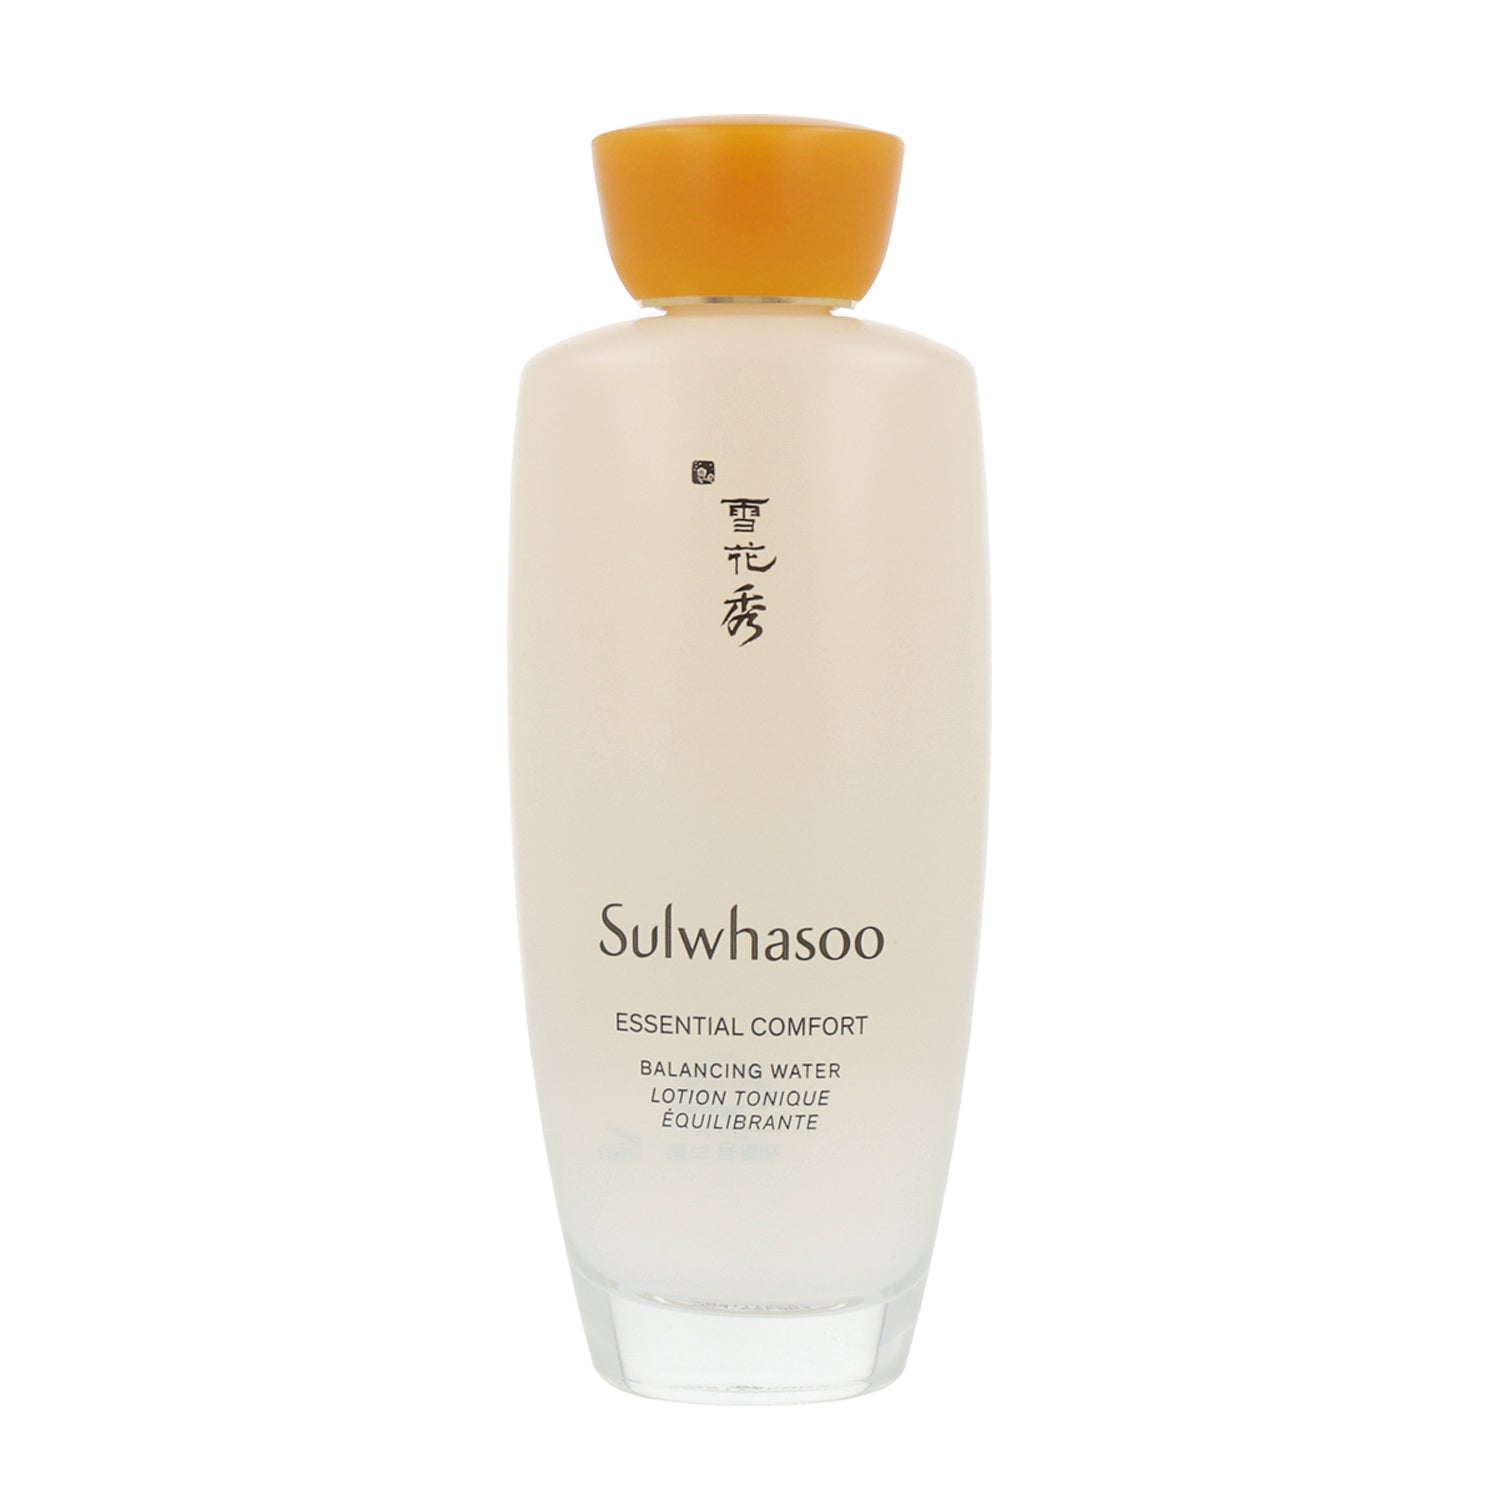 Sulwhasoo cleansing oil with yellow and orange, part of the Sulwhasoo Firming Care Essential Ritual Set